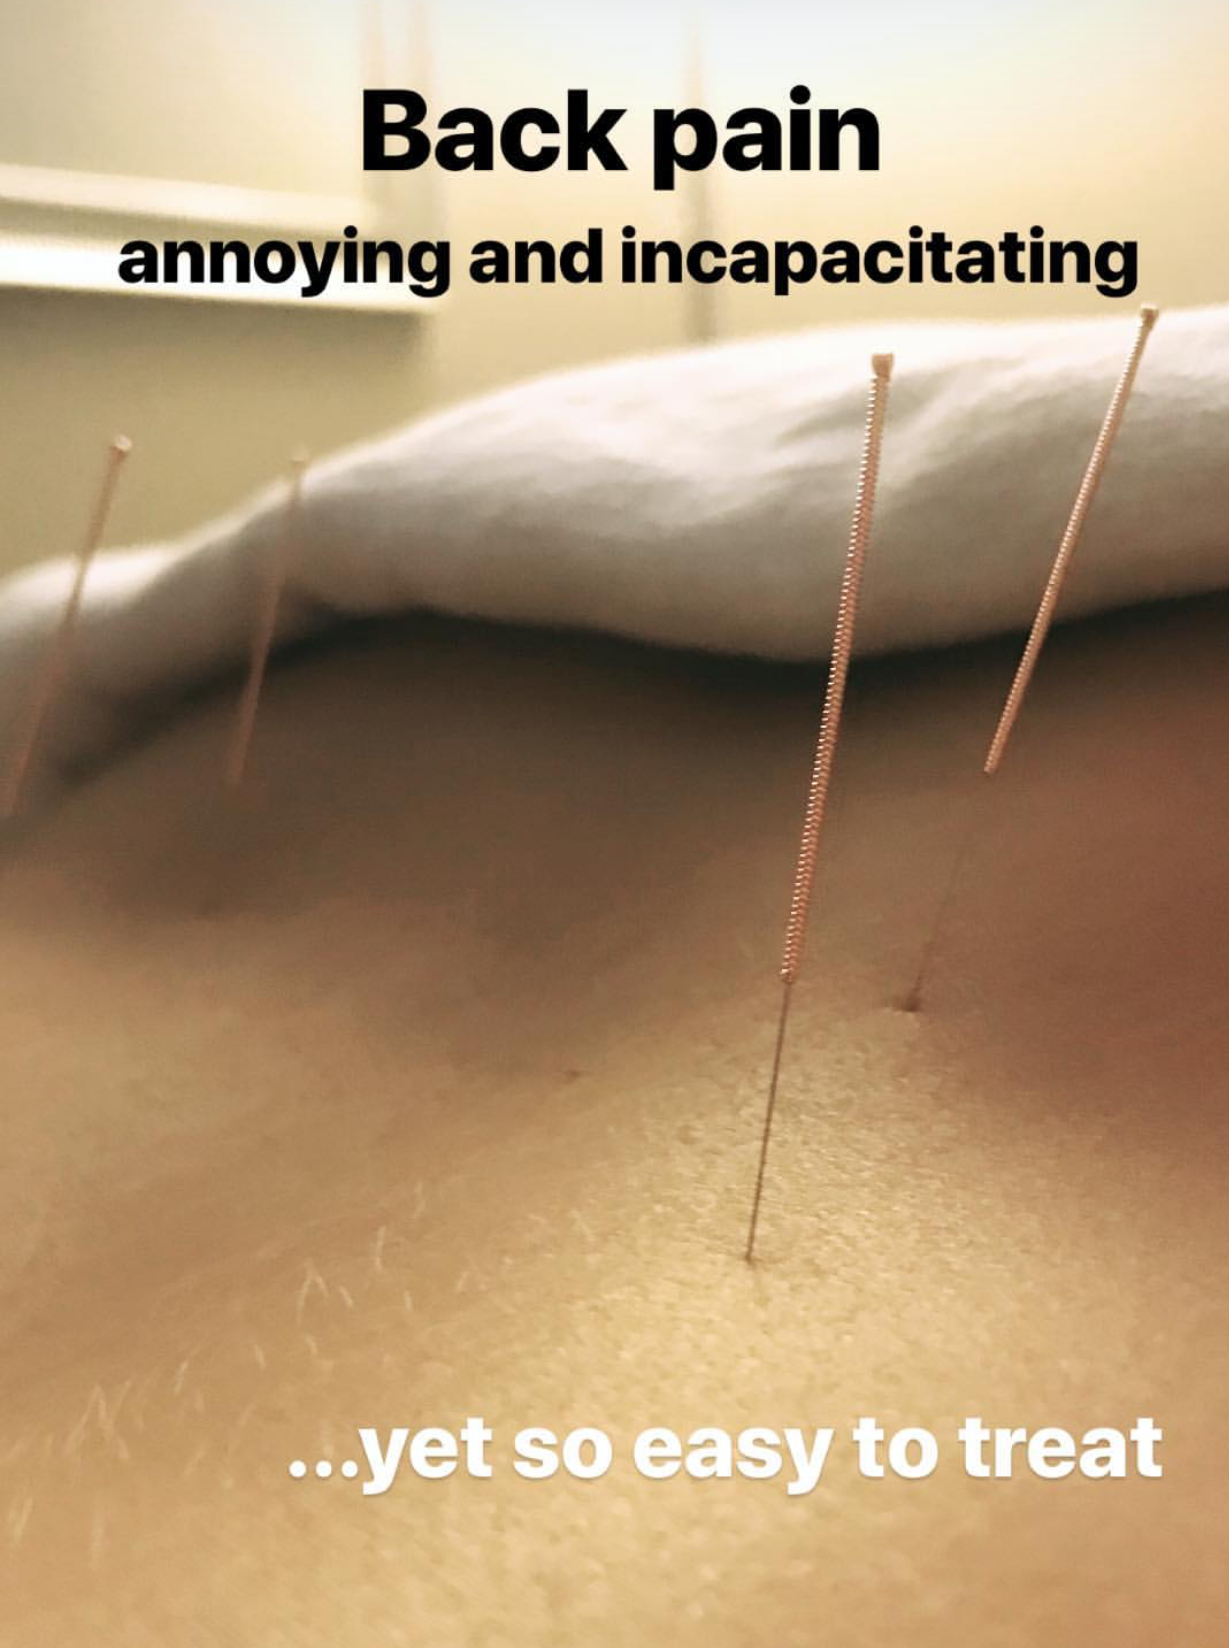  Acupuncture treatment based in Vancouver used for pain syndrome on patient with incapacitating back pain 